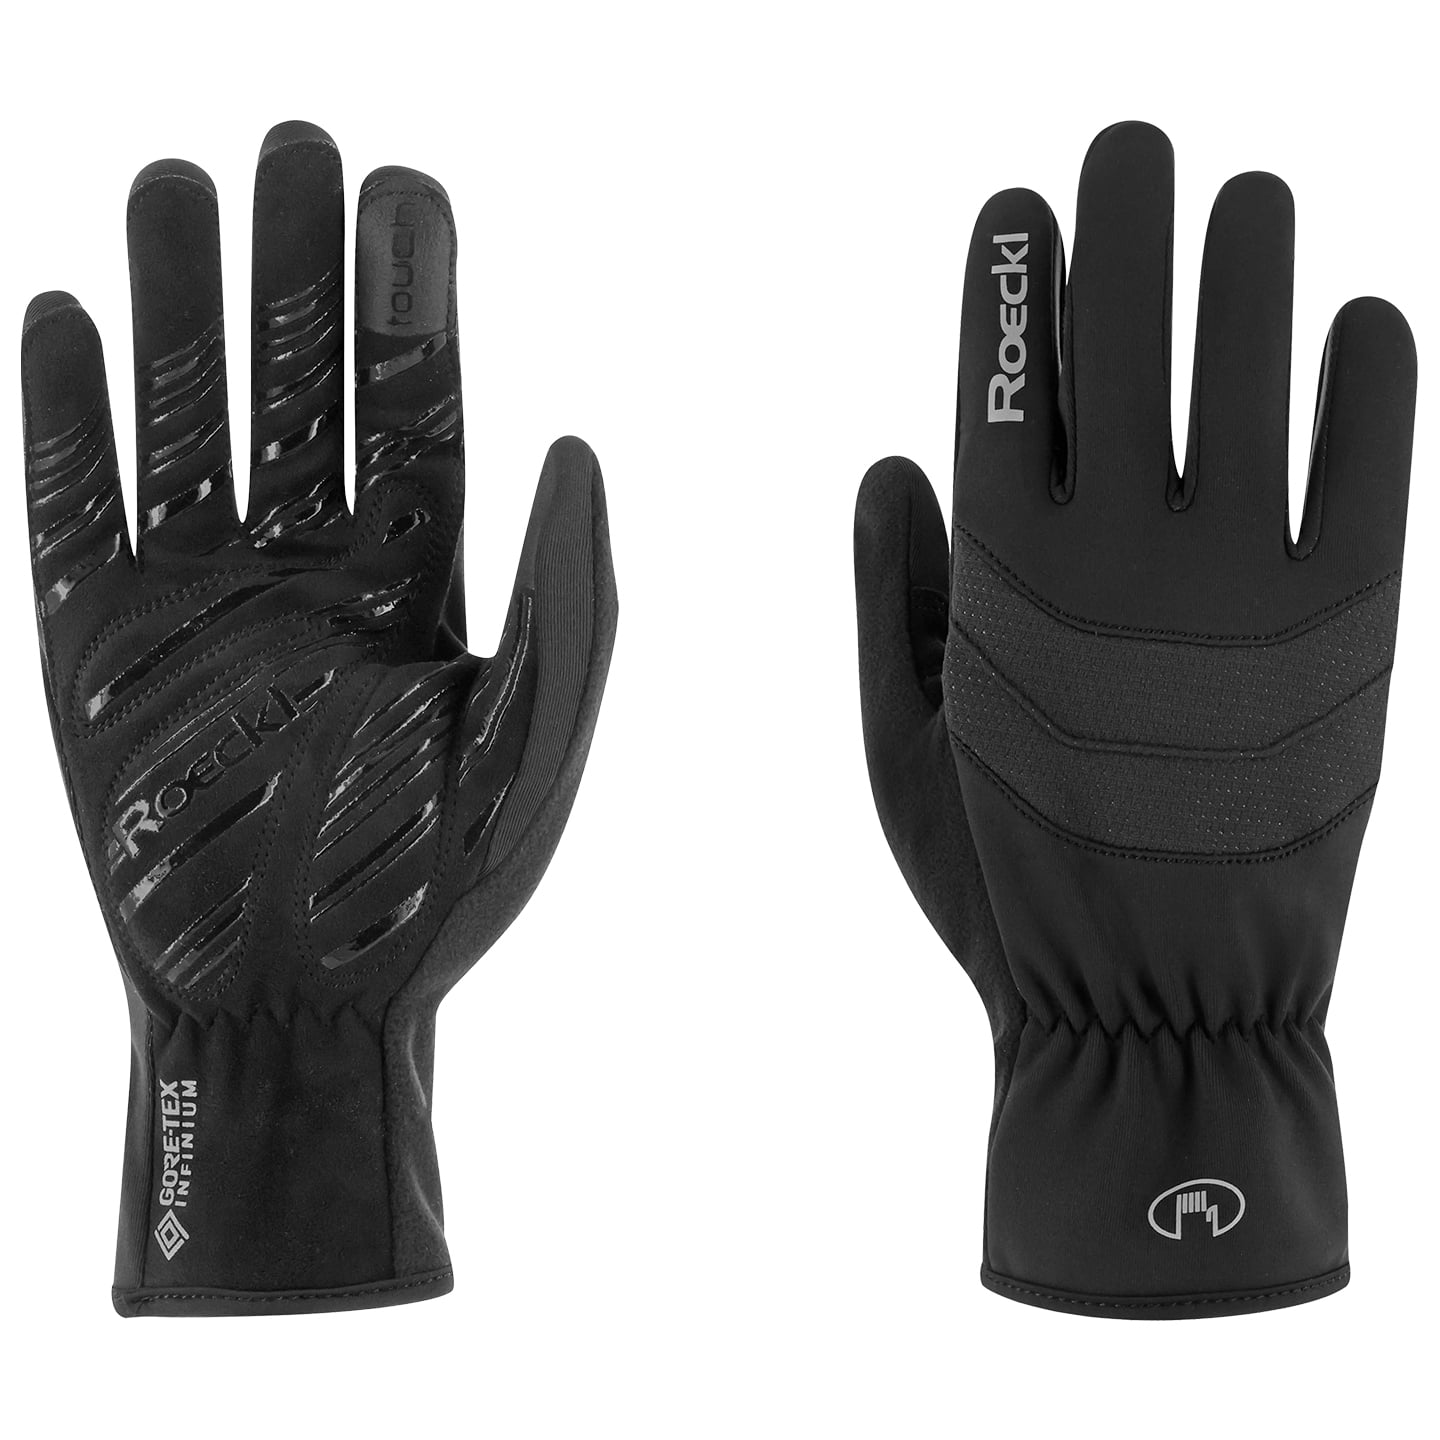 ROECKL Raiano Winter Gloves Winter Cycling Gloves, for men, size 8,5, MTB gloves, Cycling apparel